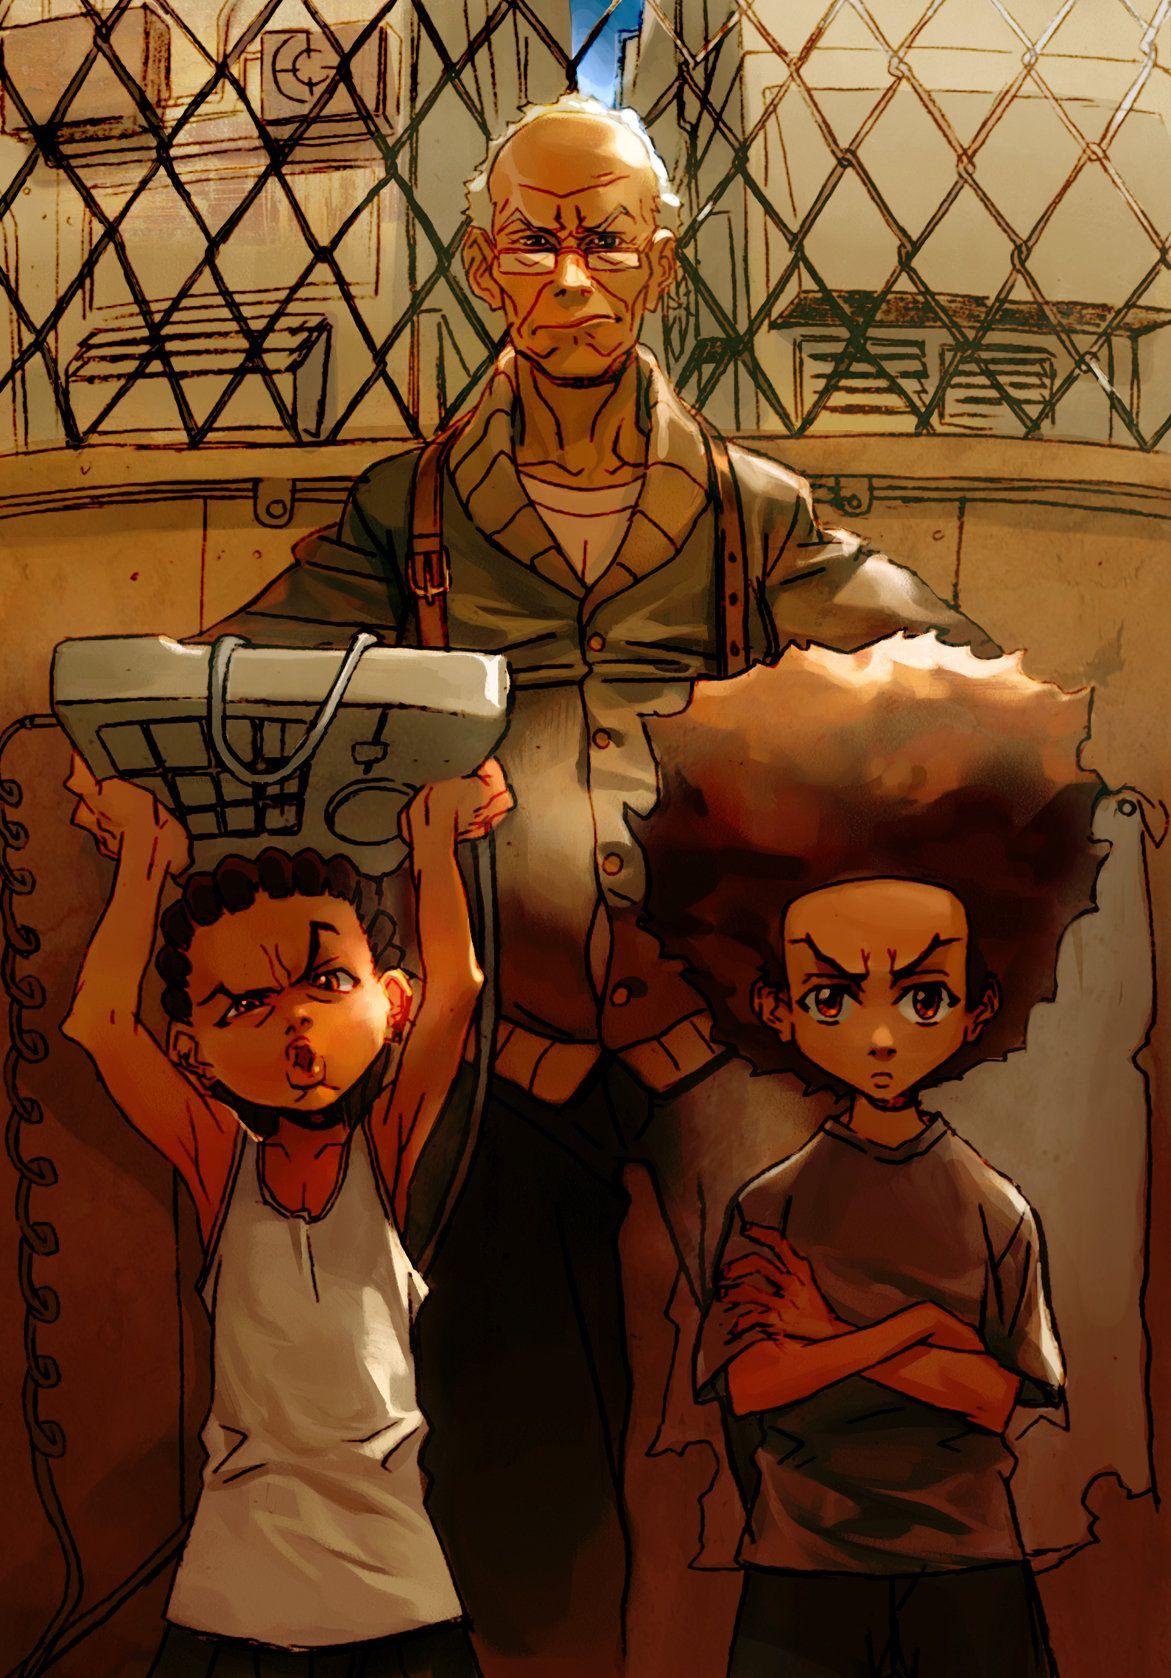 The Boondocks Wallpapers Hd Wallpaper Cave We have a massive amount of hd images that will make your computer or smartphone look absolutely fresh. the boondocks wallpapers hd wallpaper